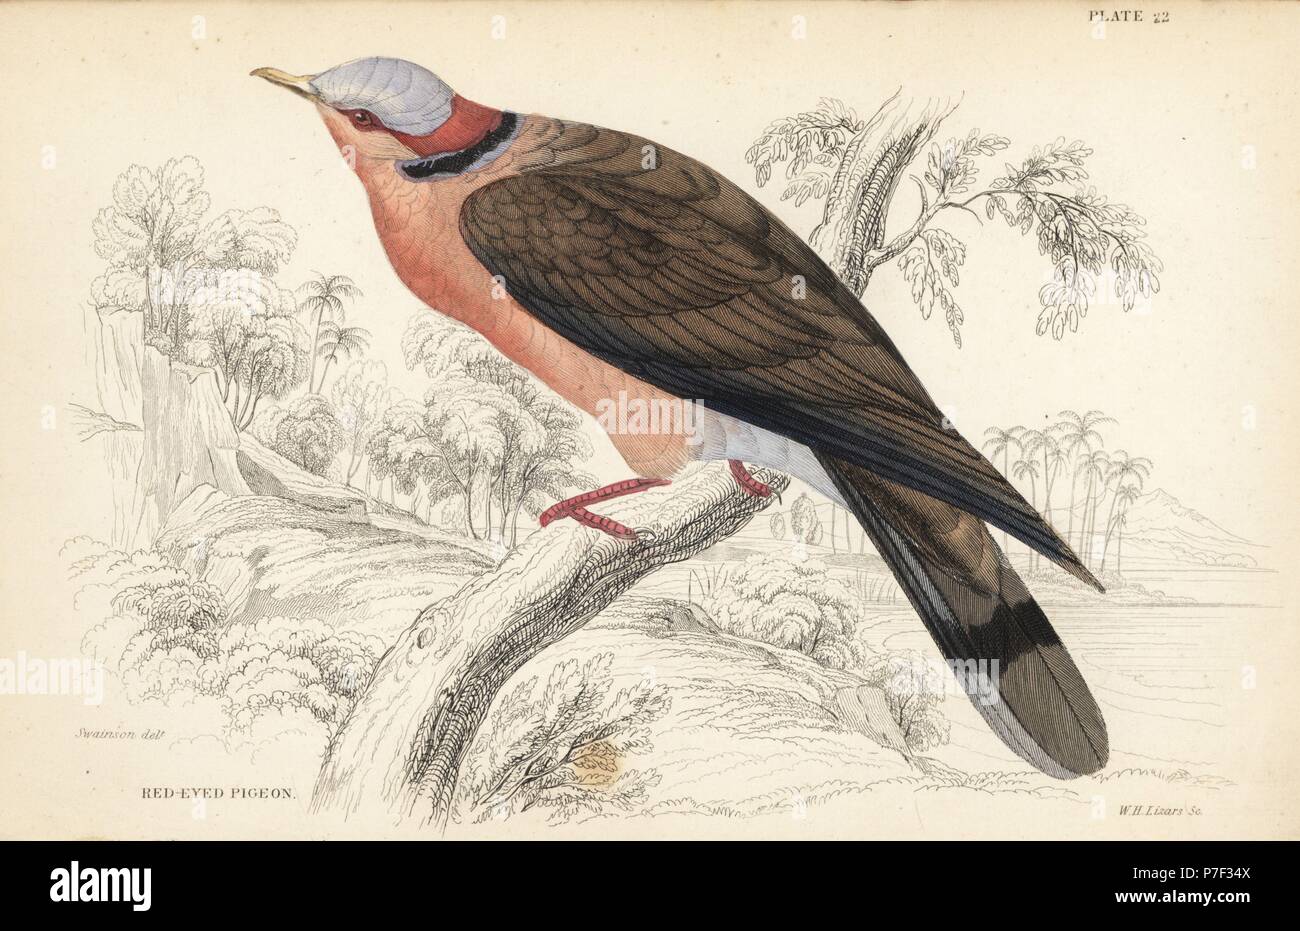 Red-eyed dove, Streptopelia semitorquata (Red-eyed pigeon, Turtur  erythrophrys). Handcoloured steel engraving by William Lizars after William  Swainson from Sir William Jardine's Naturalist's Library: Ornithology:  Birds of Western Africa, Edinburgh ...